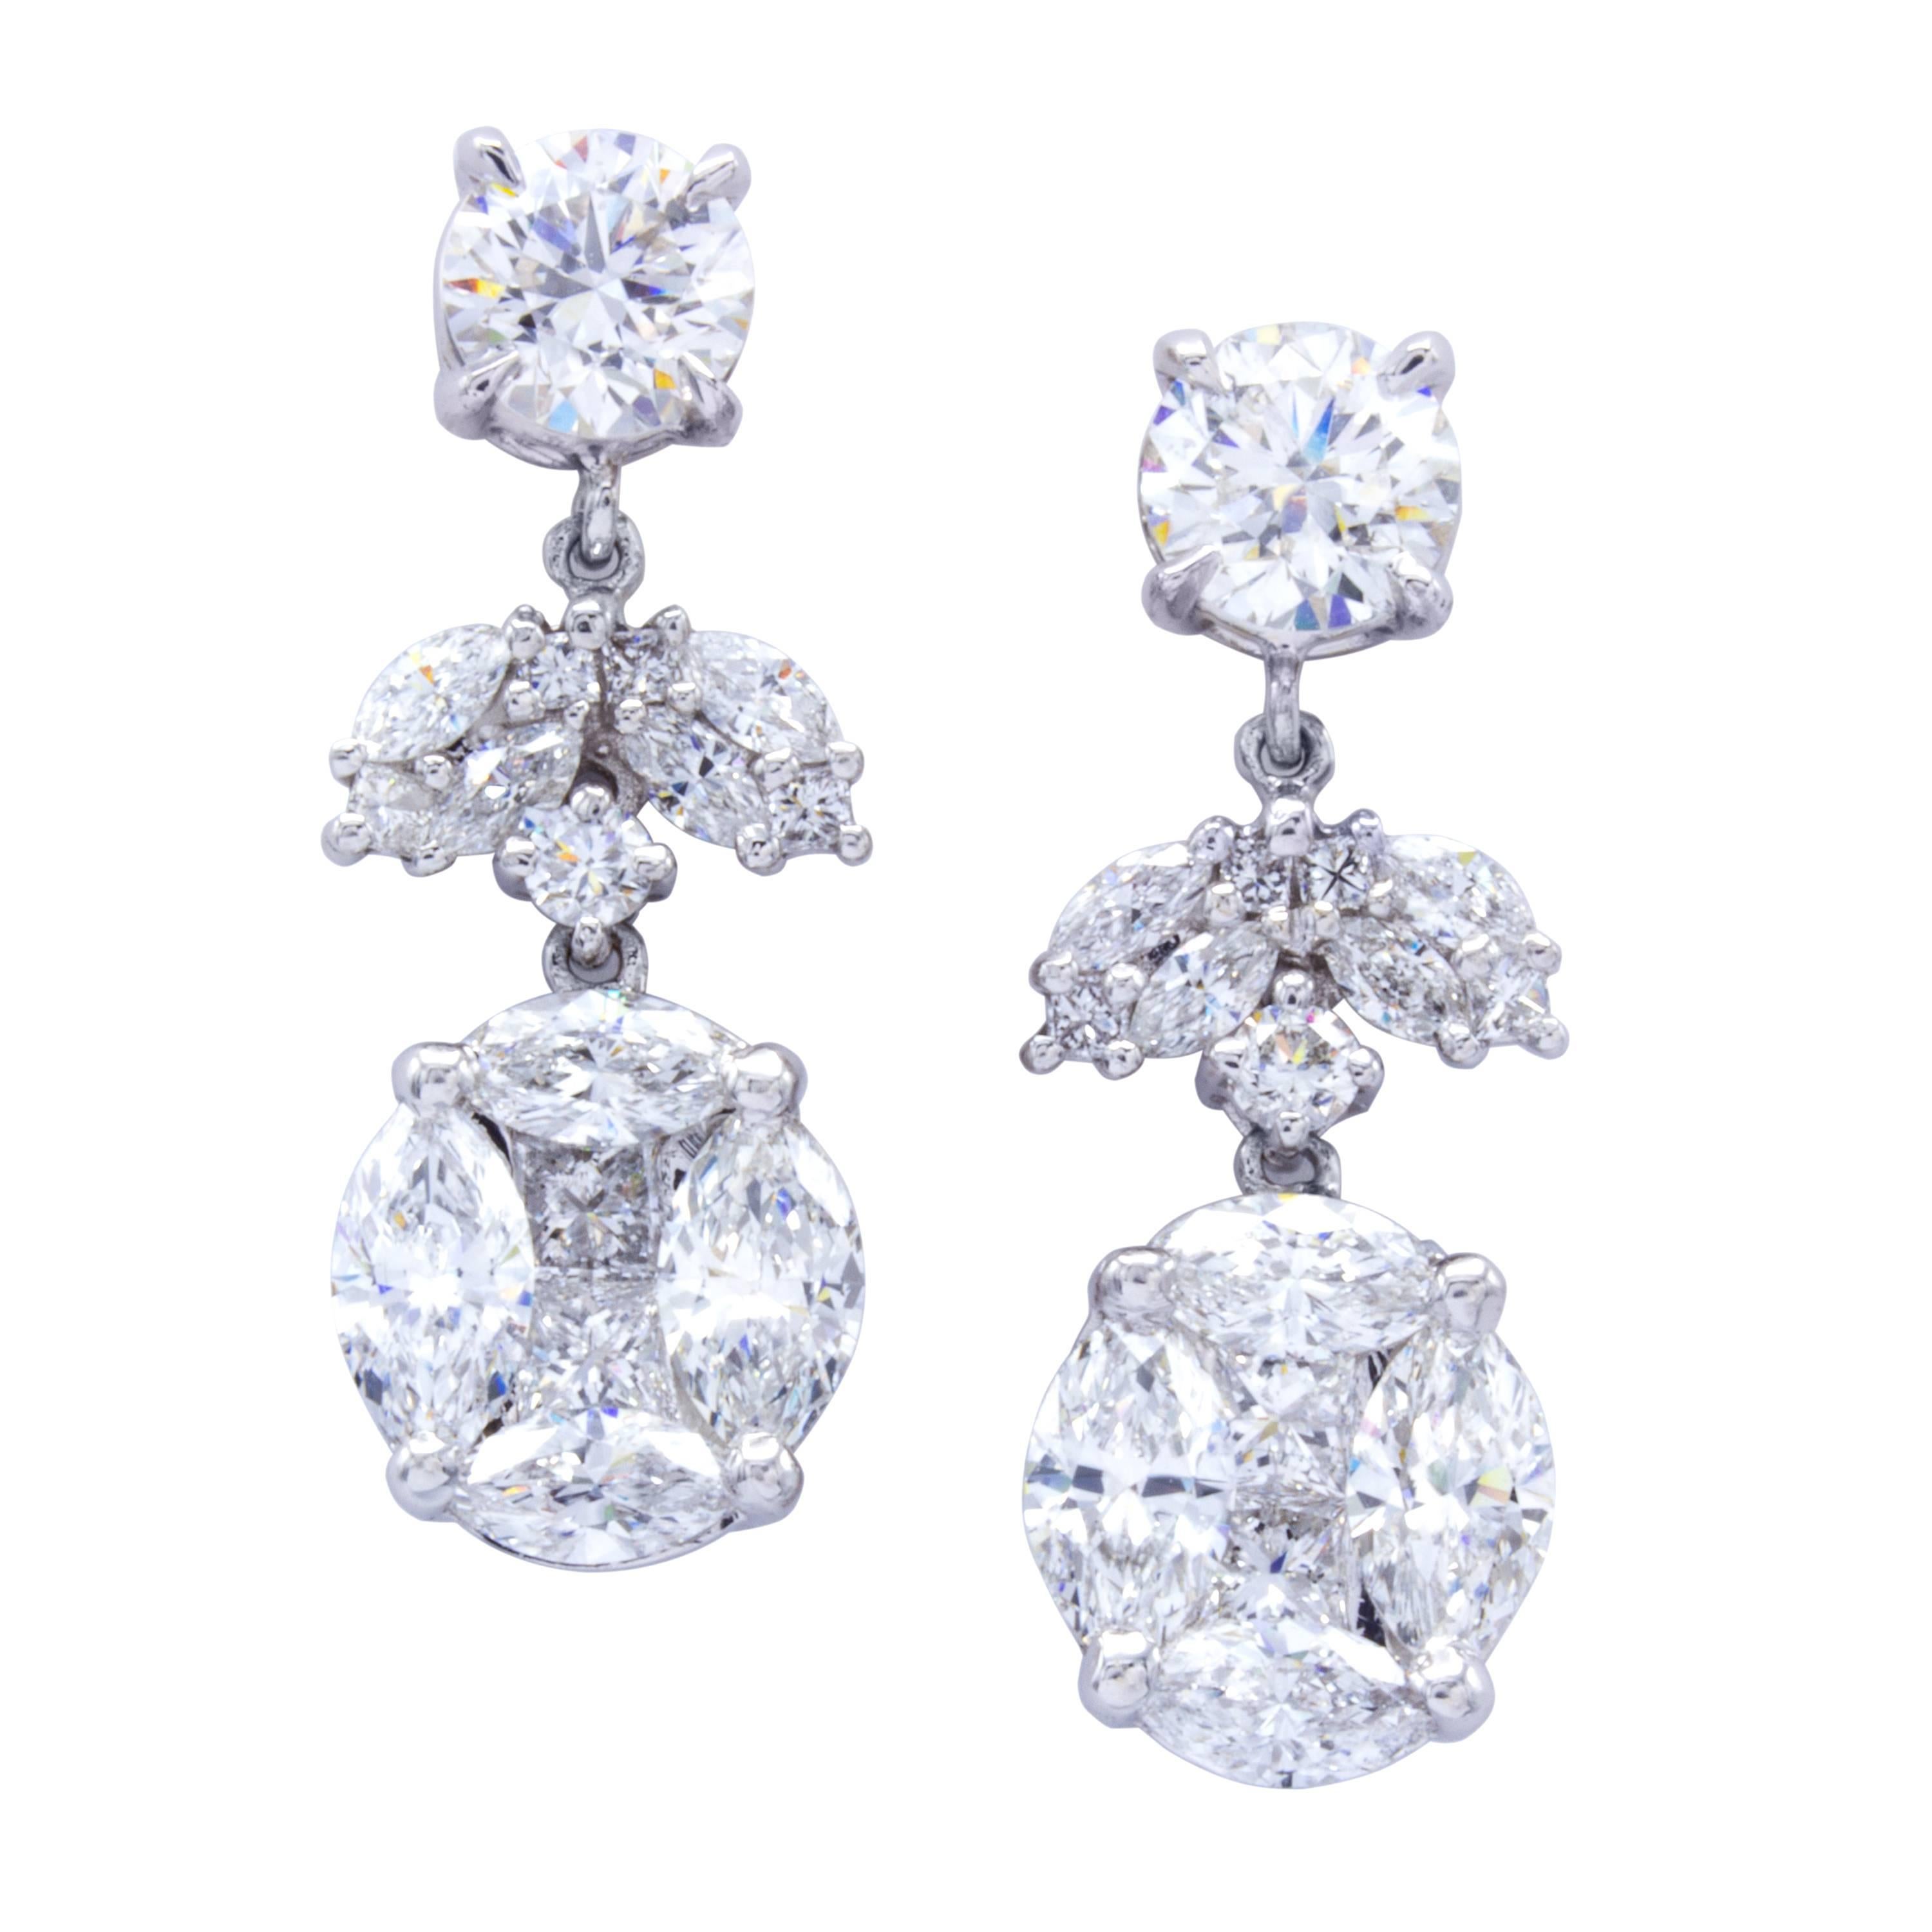 A scintillating design that gathers beautiful GIA certified diamonds in classic shapes and innovates them into an illusion setting. Two round brilliant studs suspend a collection of marquise cut, round brilliant, and princess cut diamonds in 18Kt